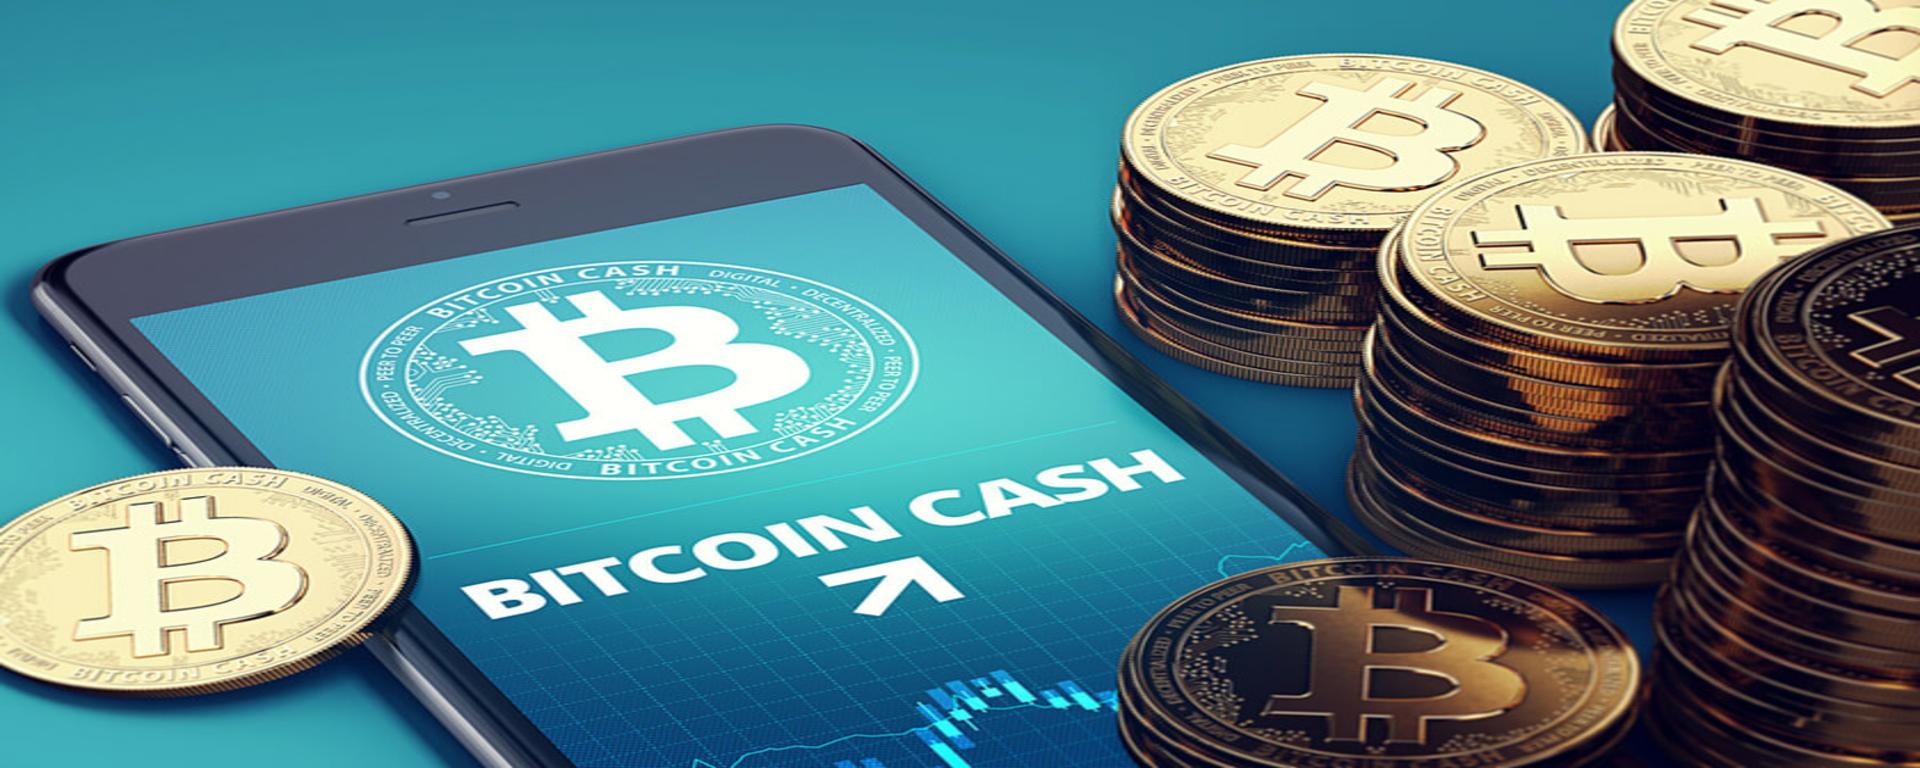 can i buy bitcoin on coinbase with usd wallet